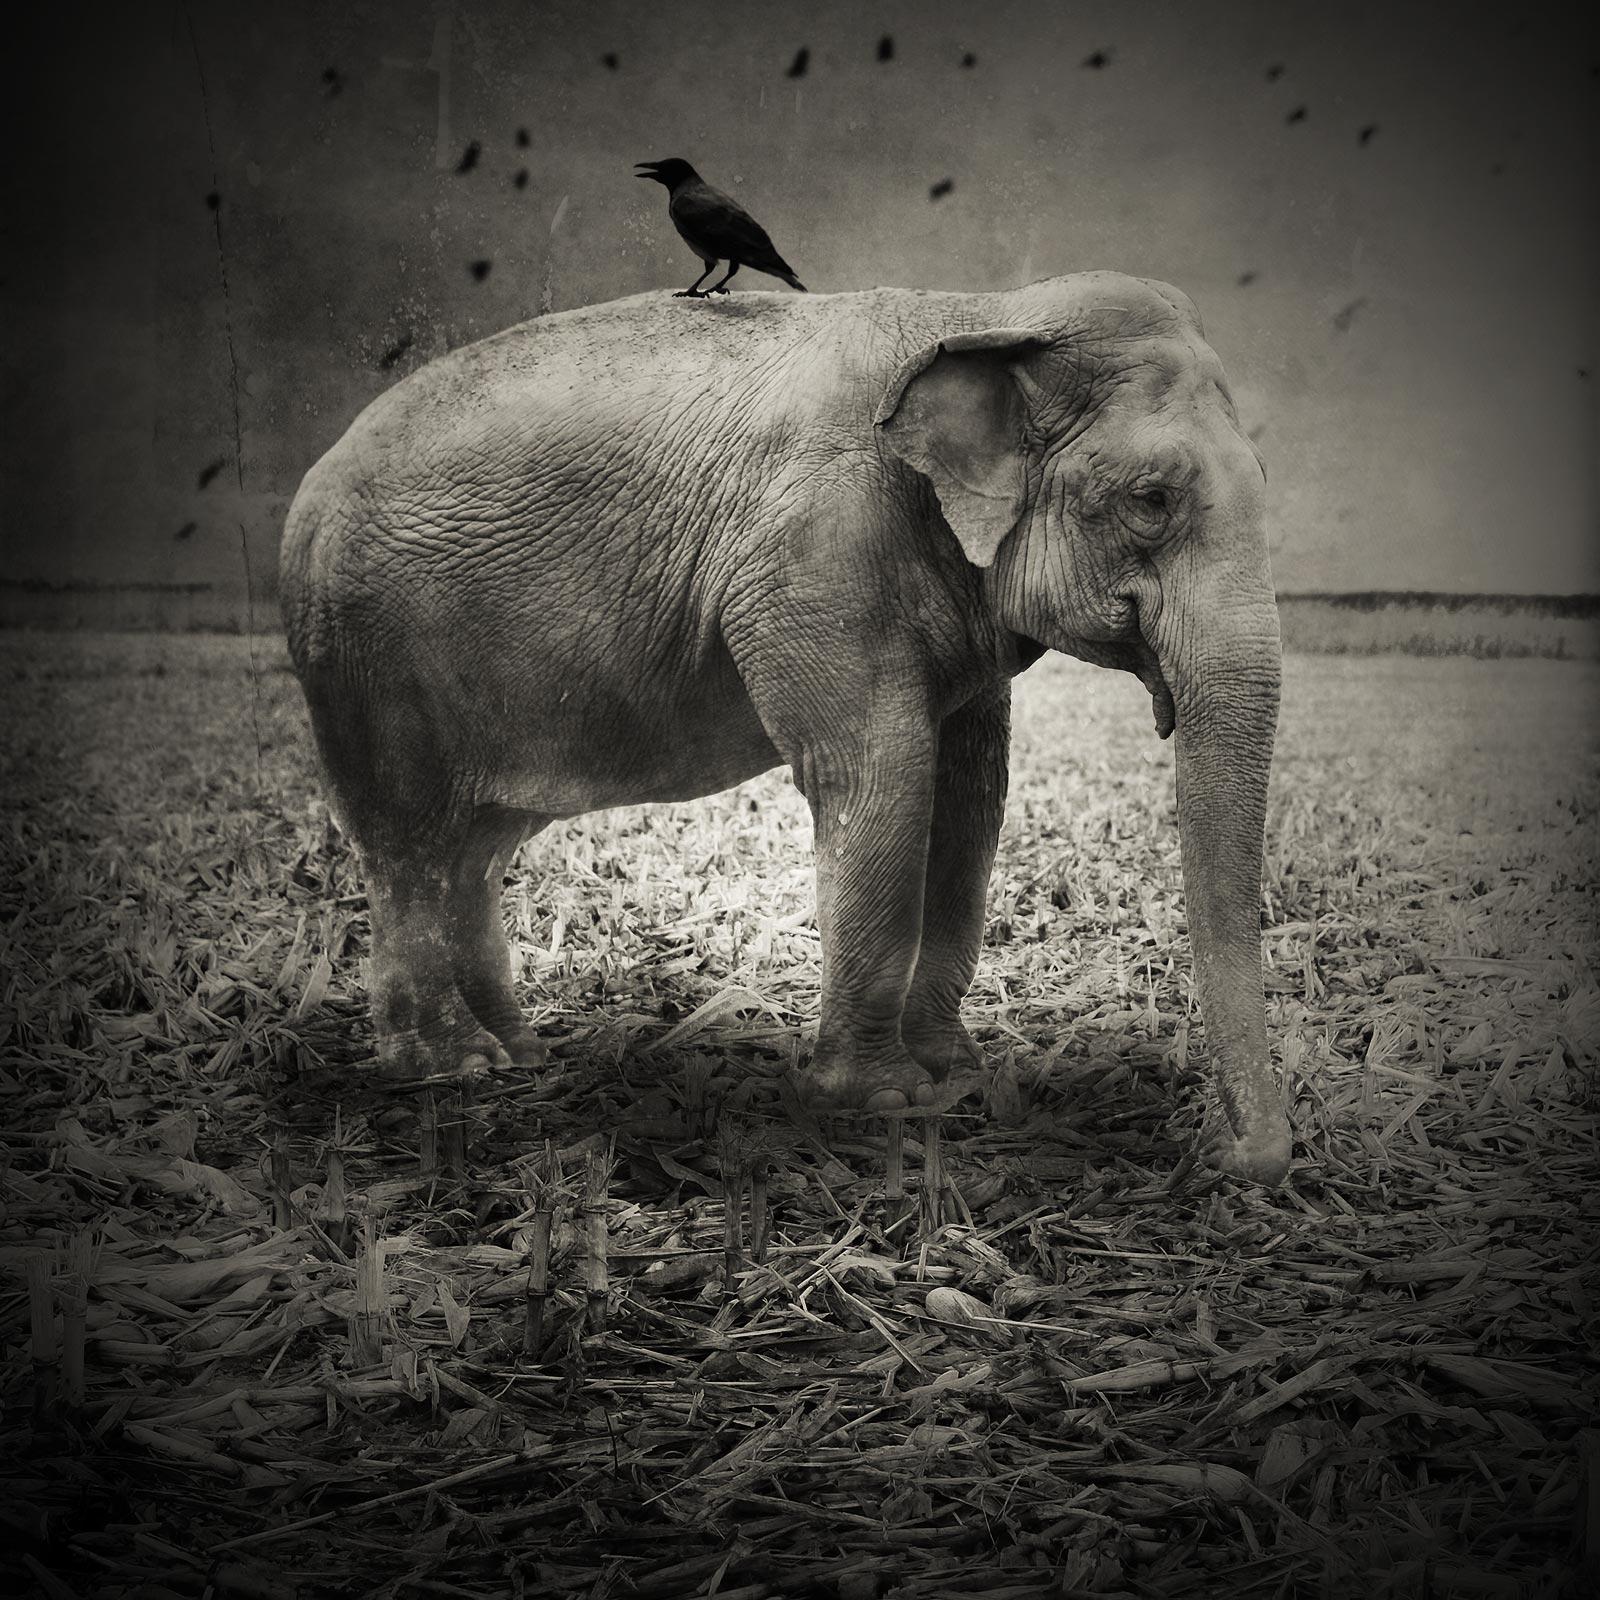 Krzysztof Wladyka, Animaly 01, (elephant), Image Size: 20 x 20". Matted Size: 30 x 30.5". Edition of 25. A visit to the Wroclaw, Poland, zoo is the inspiration for the series Animalies (Animals). These digitally produced images, excellently